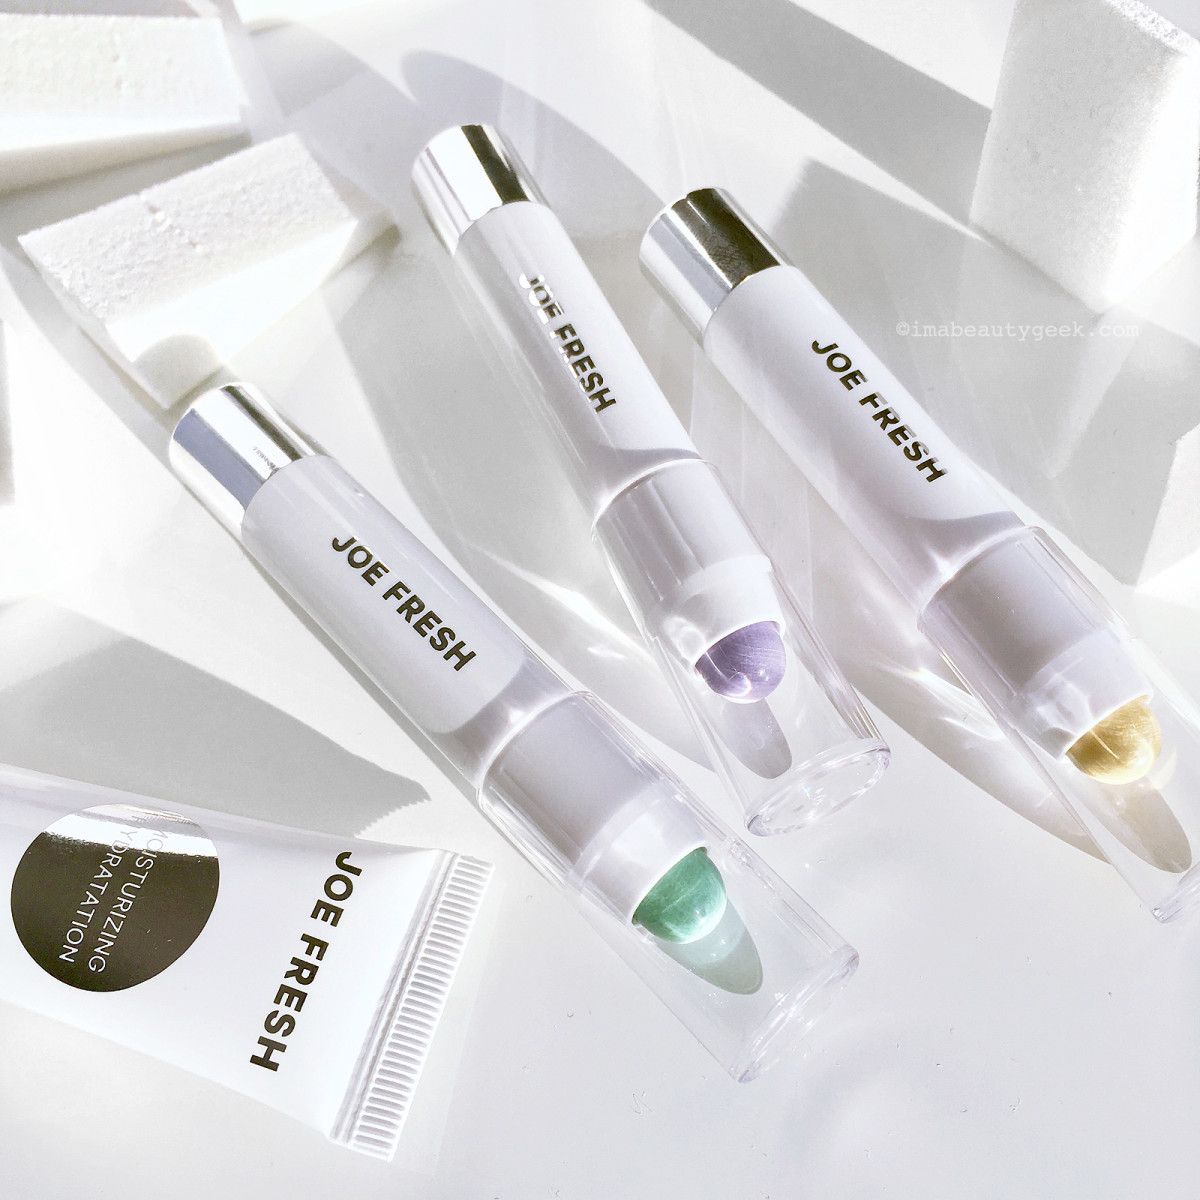 Joe Fresh Hydrating Primer, Colour Correcting Crayons and Cosmetic Wedges-BEAUTYGEEKS